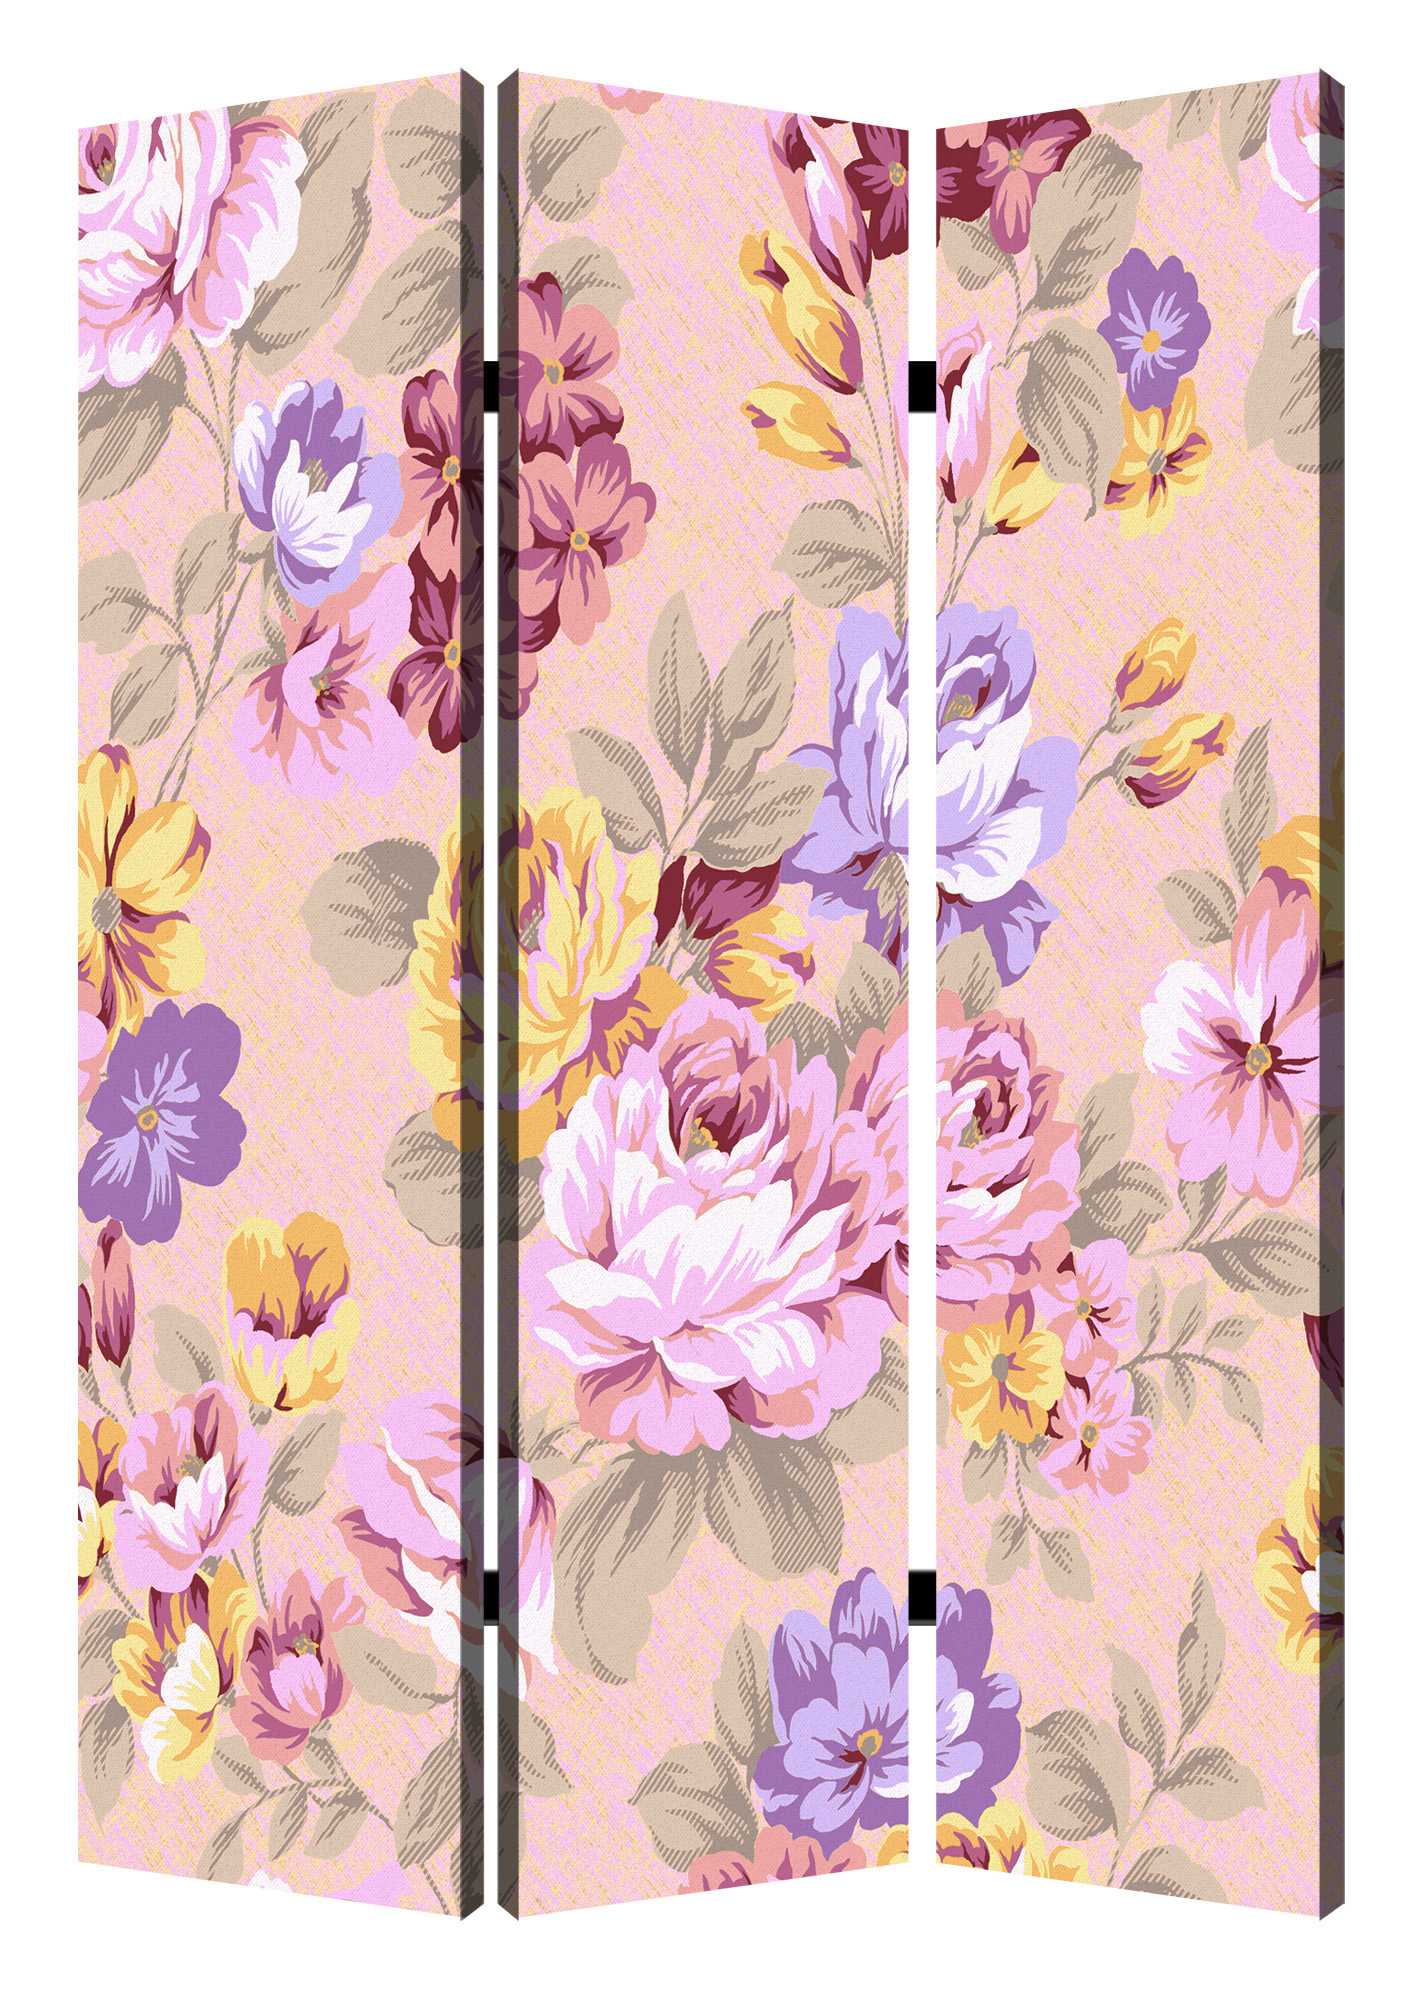 1" x 48" x 72" Multi Color Floral Pattern Screen